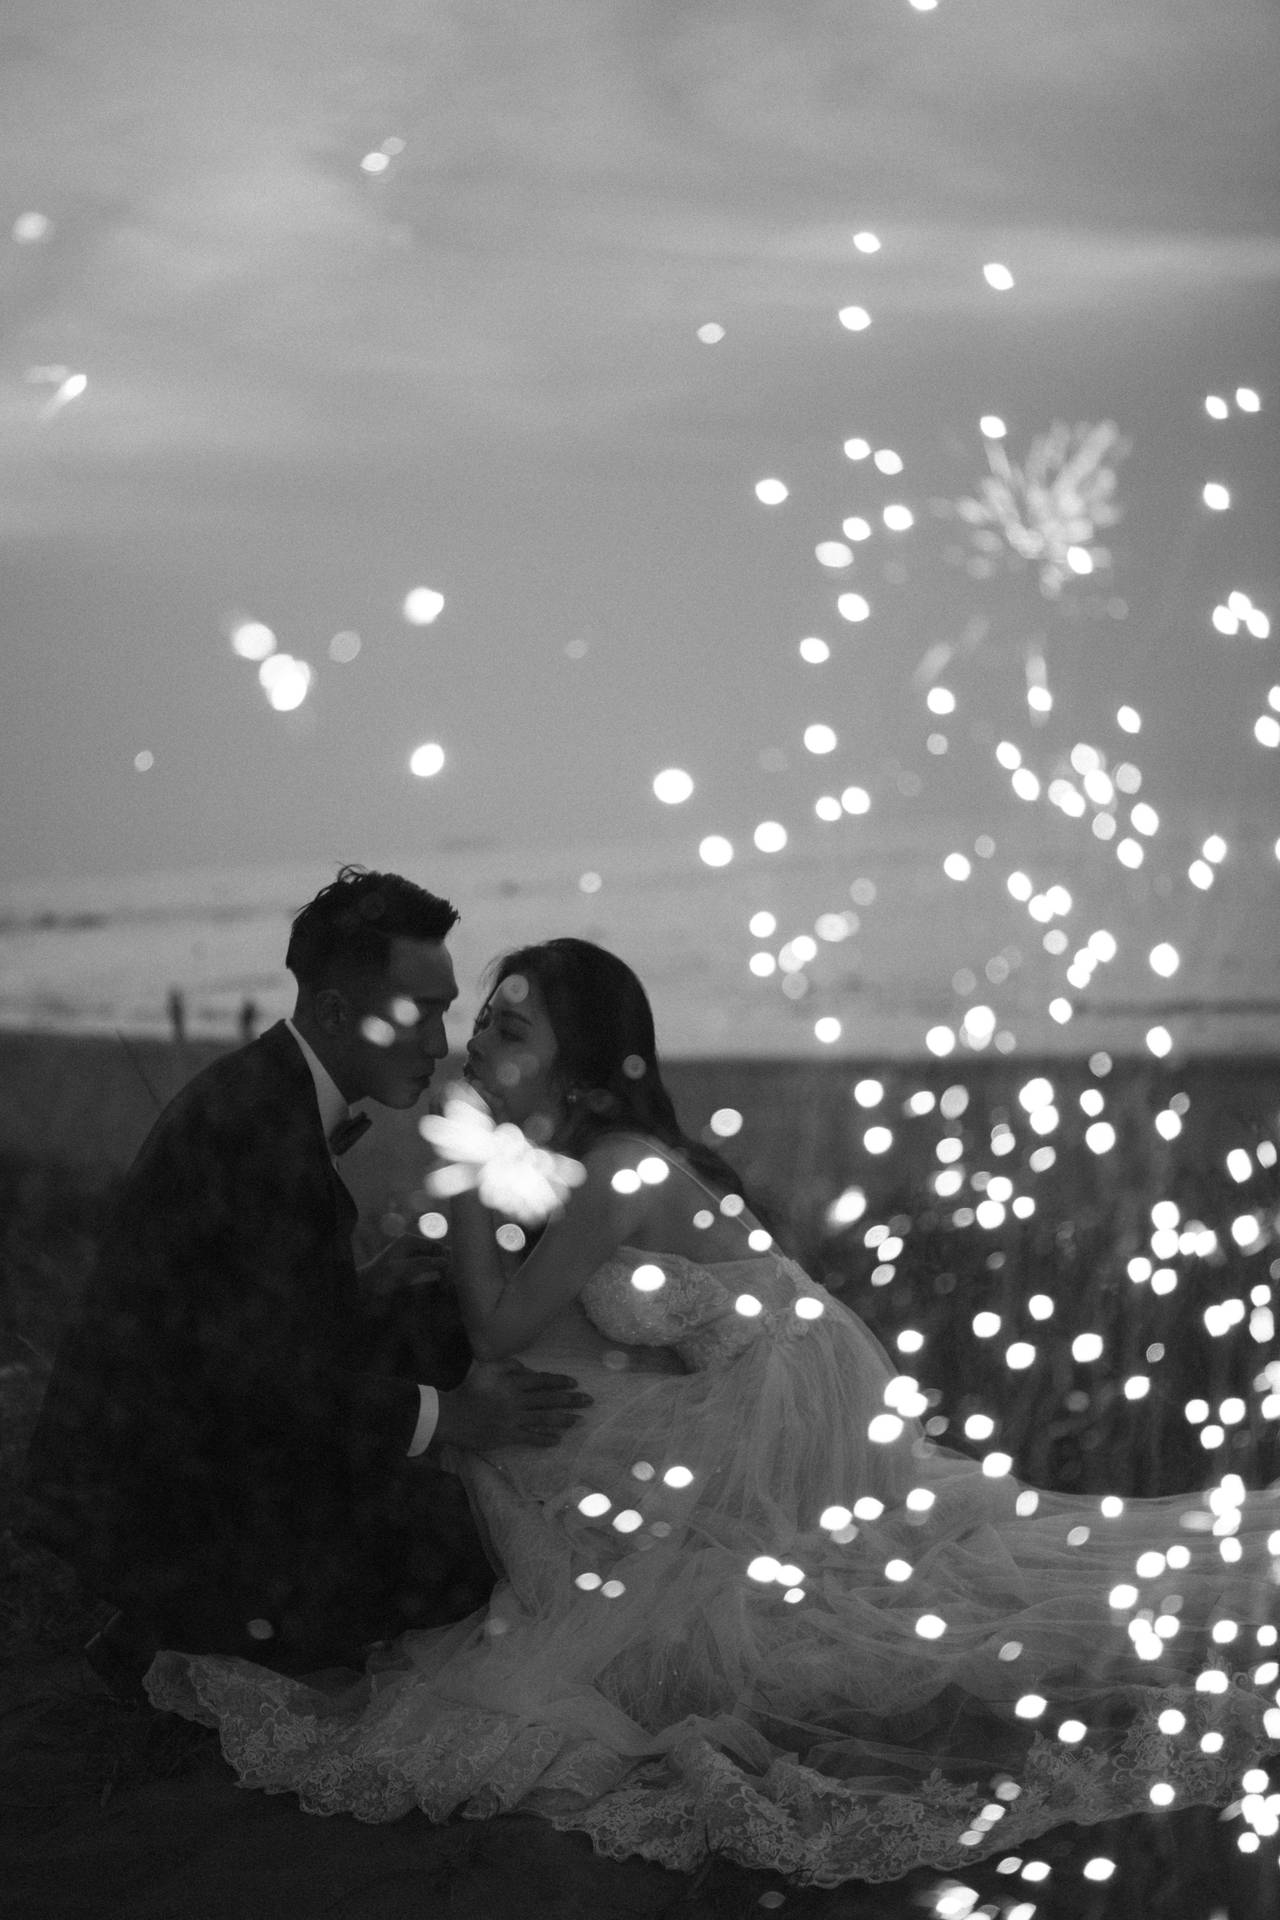 Black Love Couple With Firecrackers Background